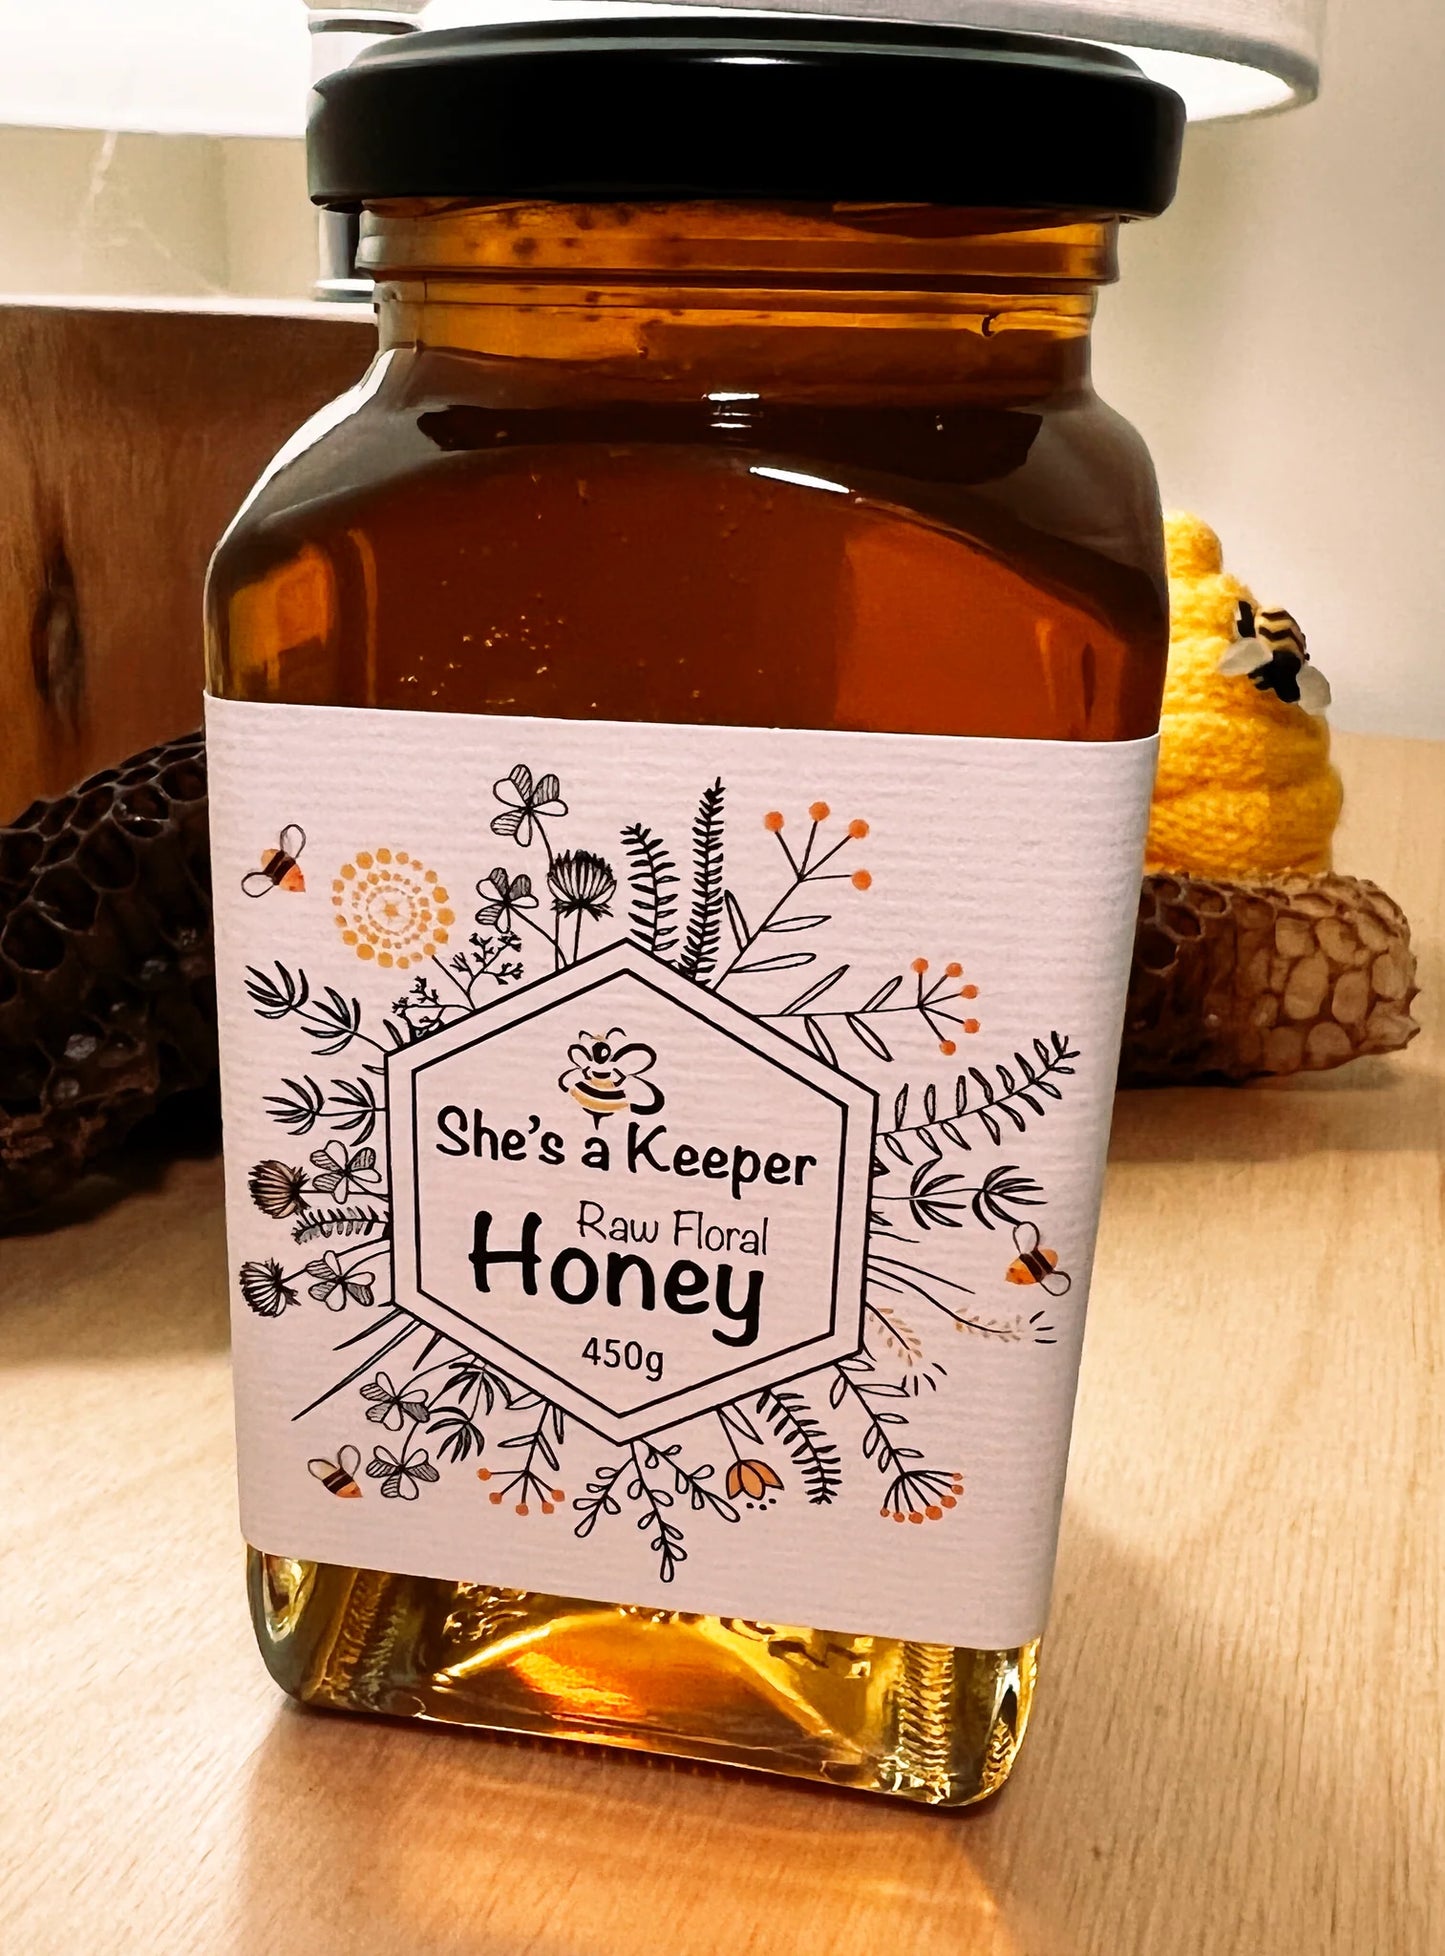 She's a Keeper 400g Raw Honey - Mixed Floral - Premium Glass Jar